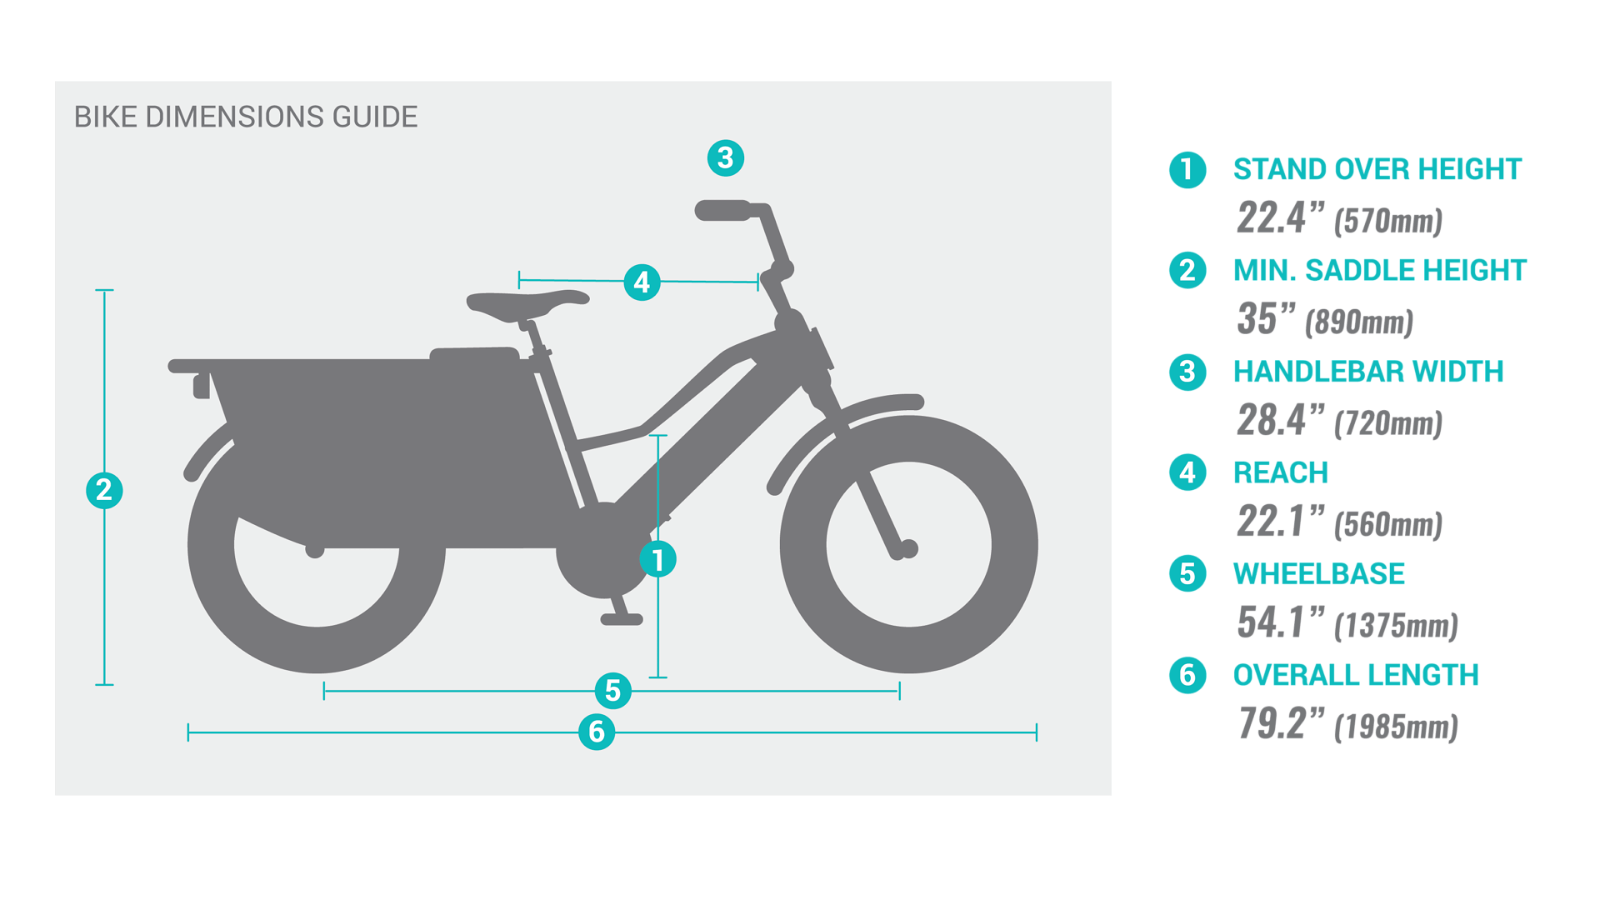 Pedego- Illustration of a CARGO with numbered labels indicating different parts and a side panel listing corresponding dimensions such as stand over height, handlebar width, and overall length.